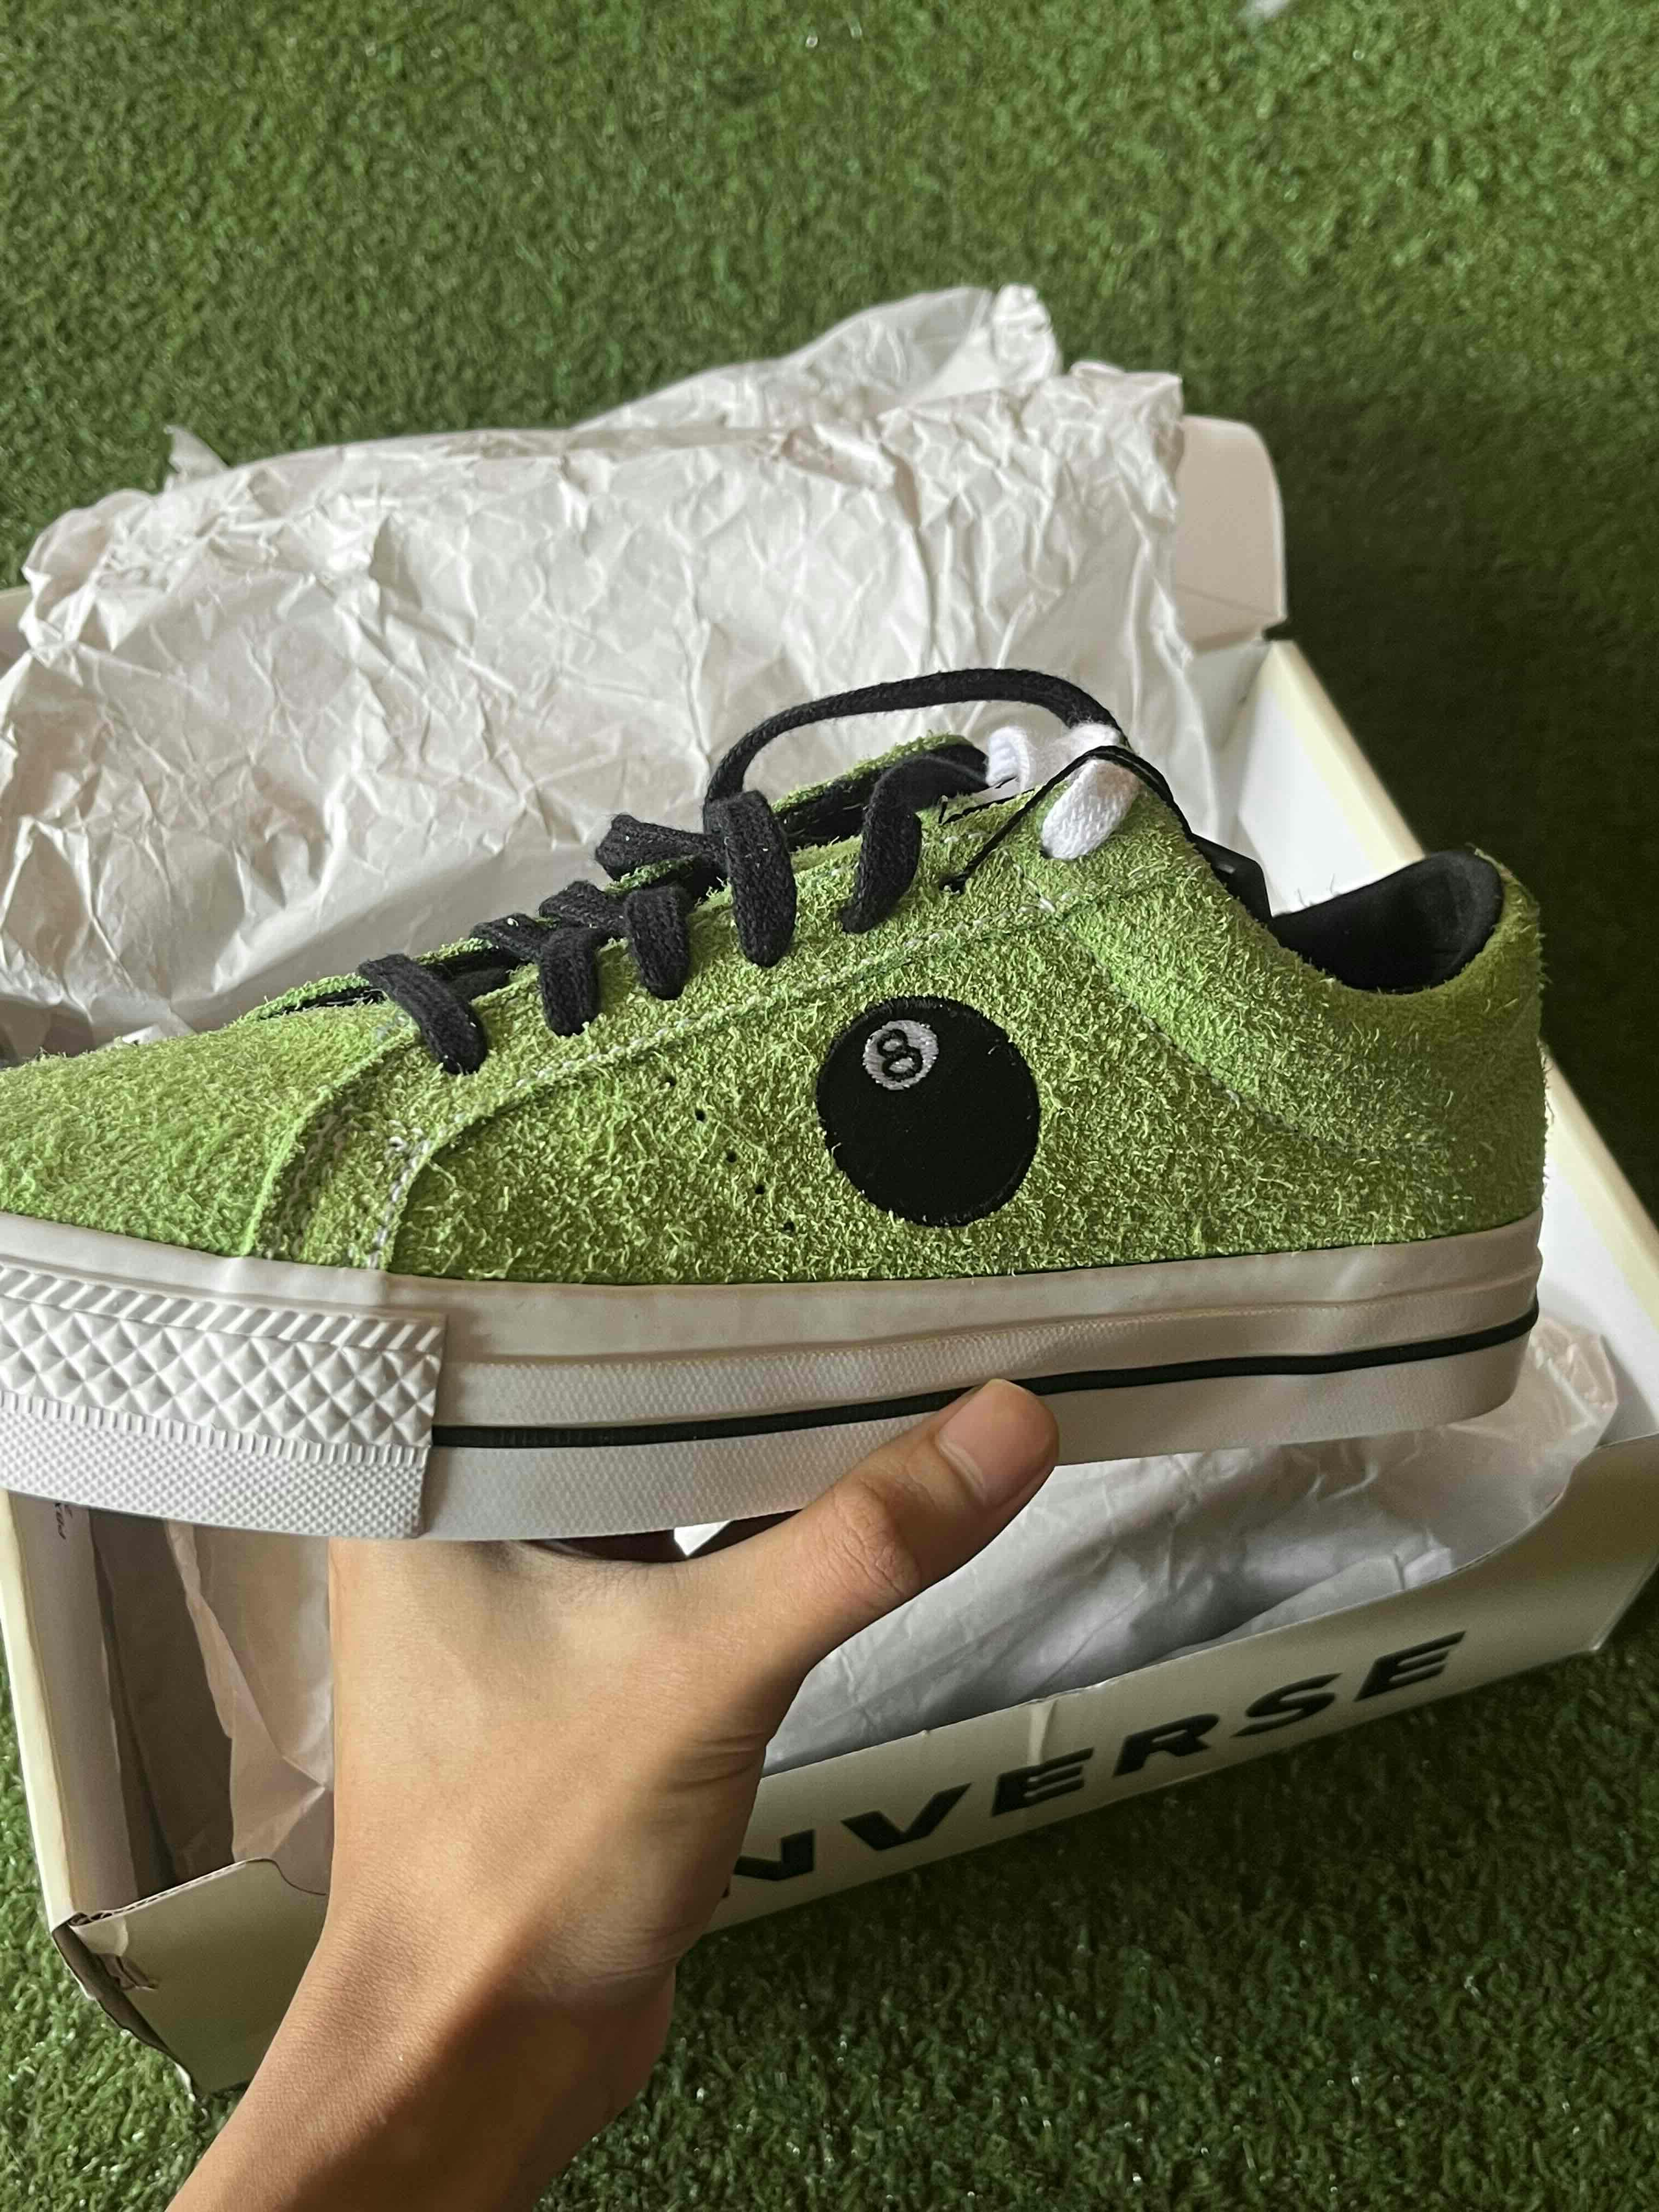 Converse One Star Pro Stussy 8-Ball Shoes